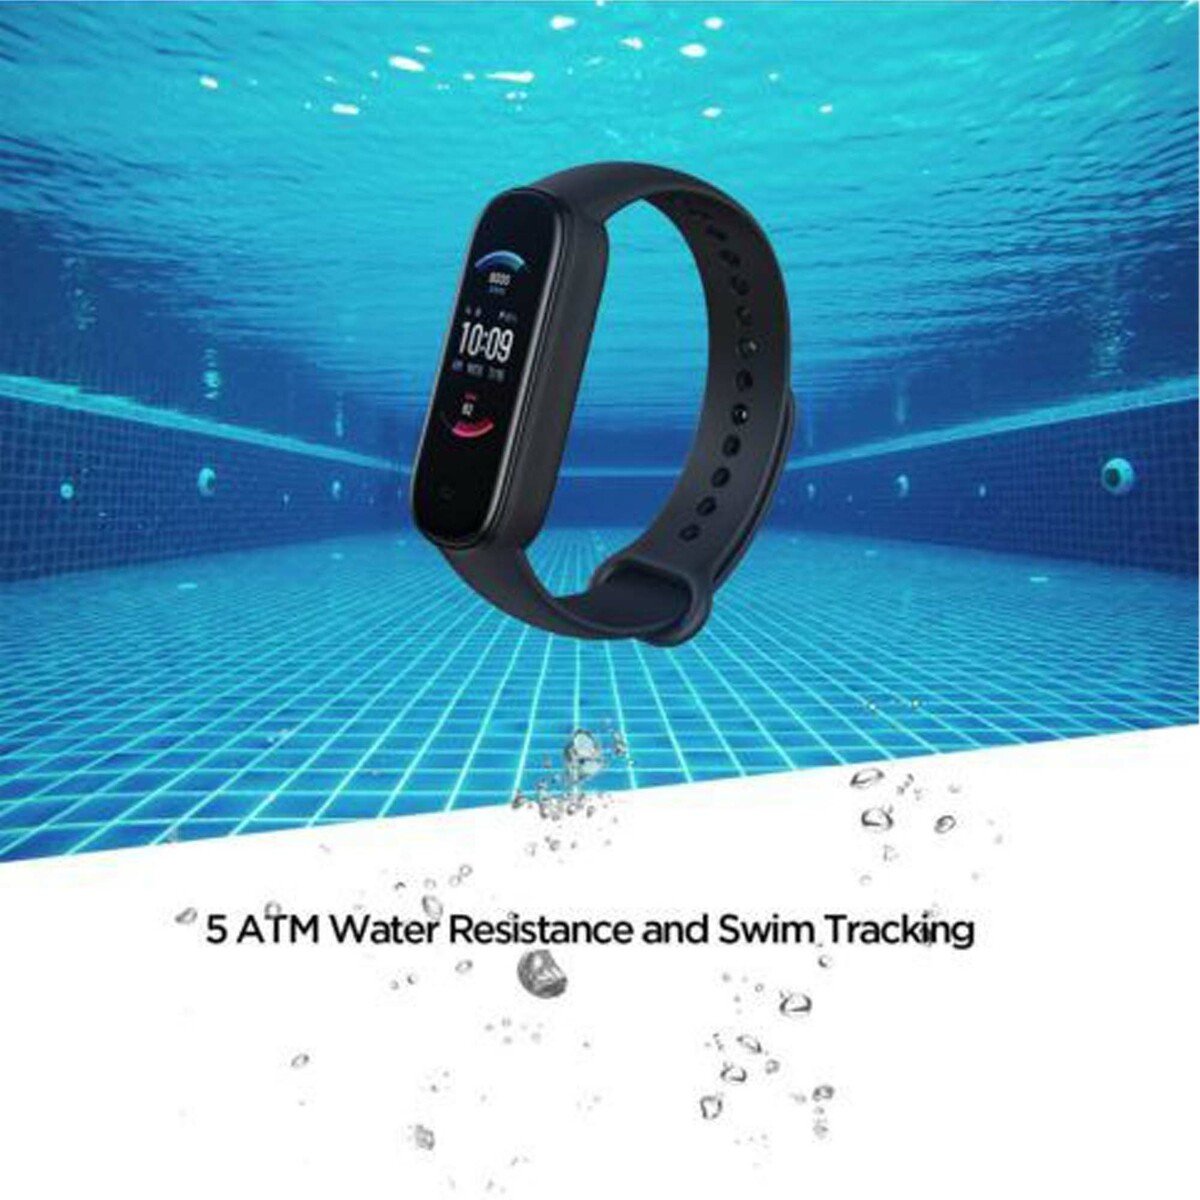 Amazfit Band 5(A2005) Fitness Tracker,15-Day Battery Life, Blood Oxygen, Heart Rate, Sleep Monitoring, Women’s Health Tracking, Music Control, Water Resistant, Black (A2005)